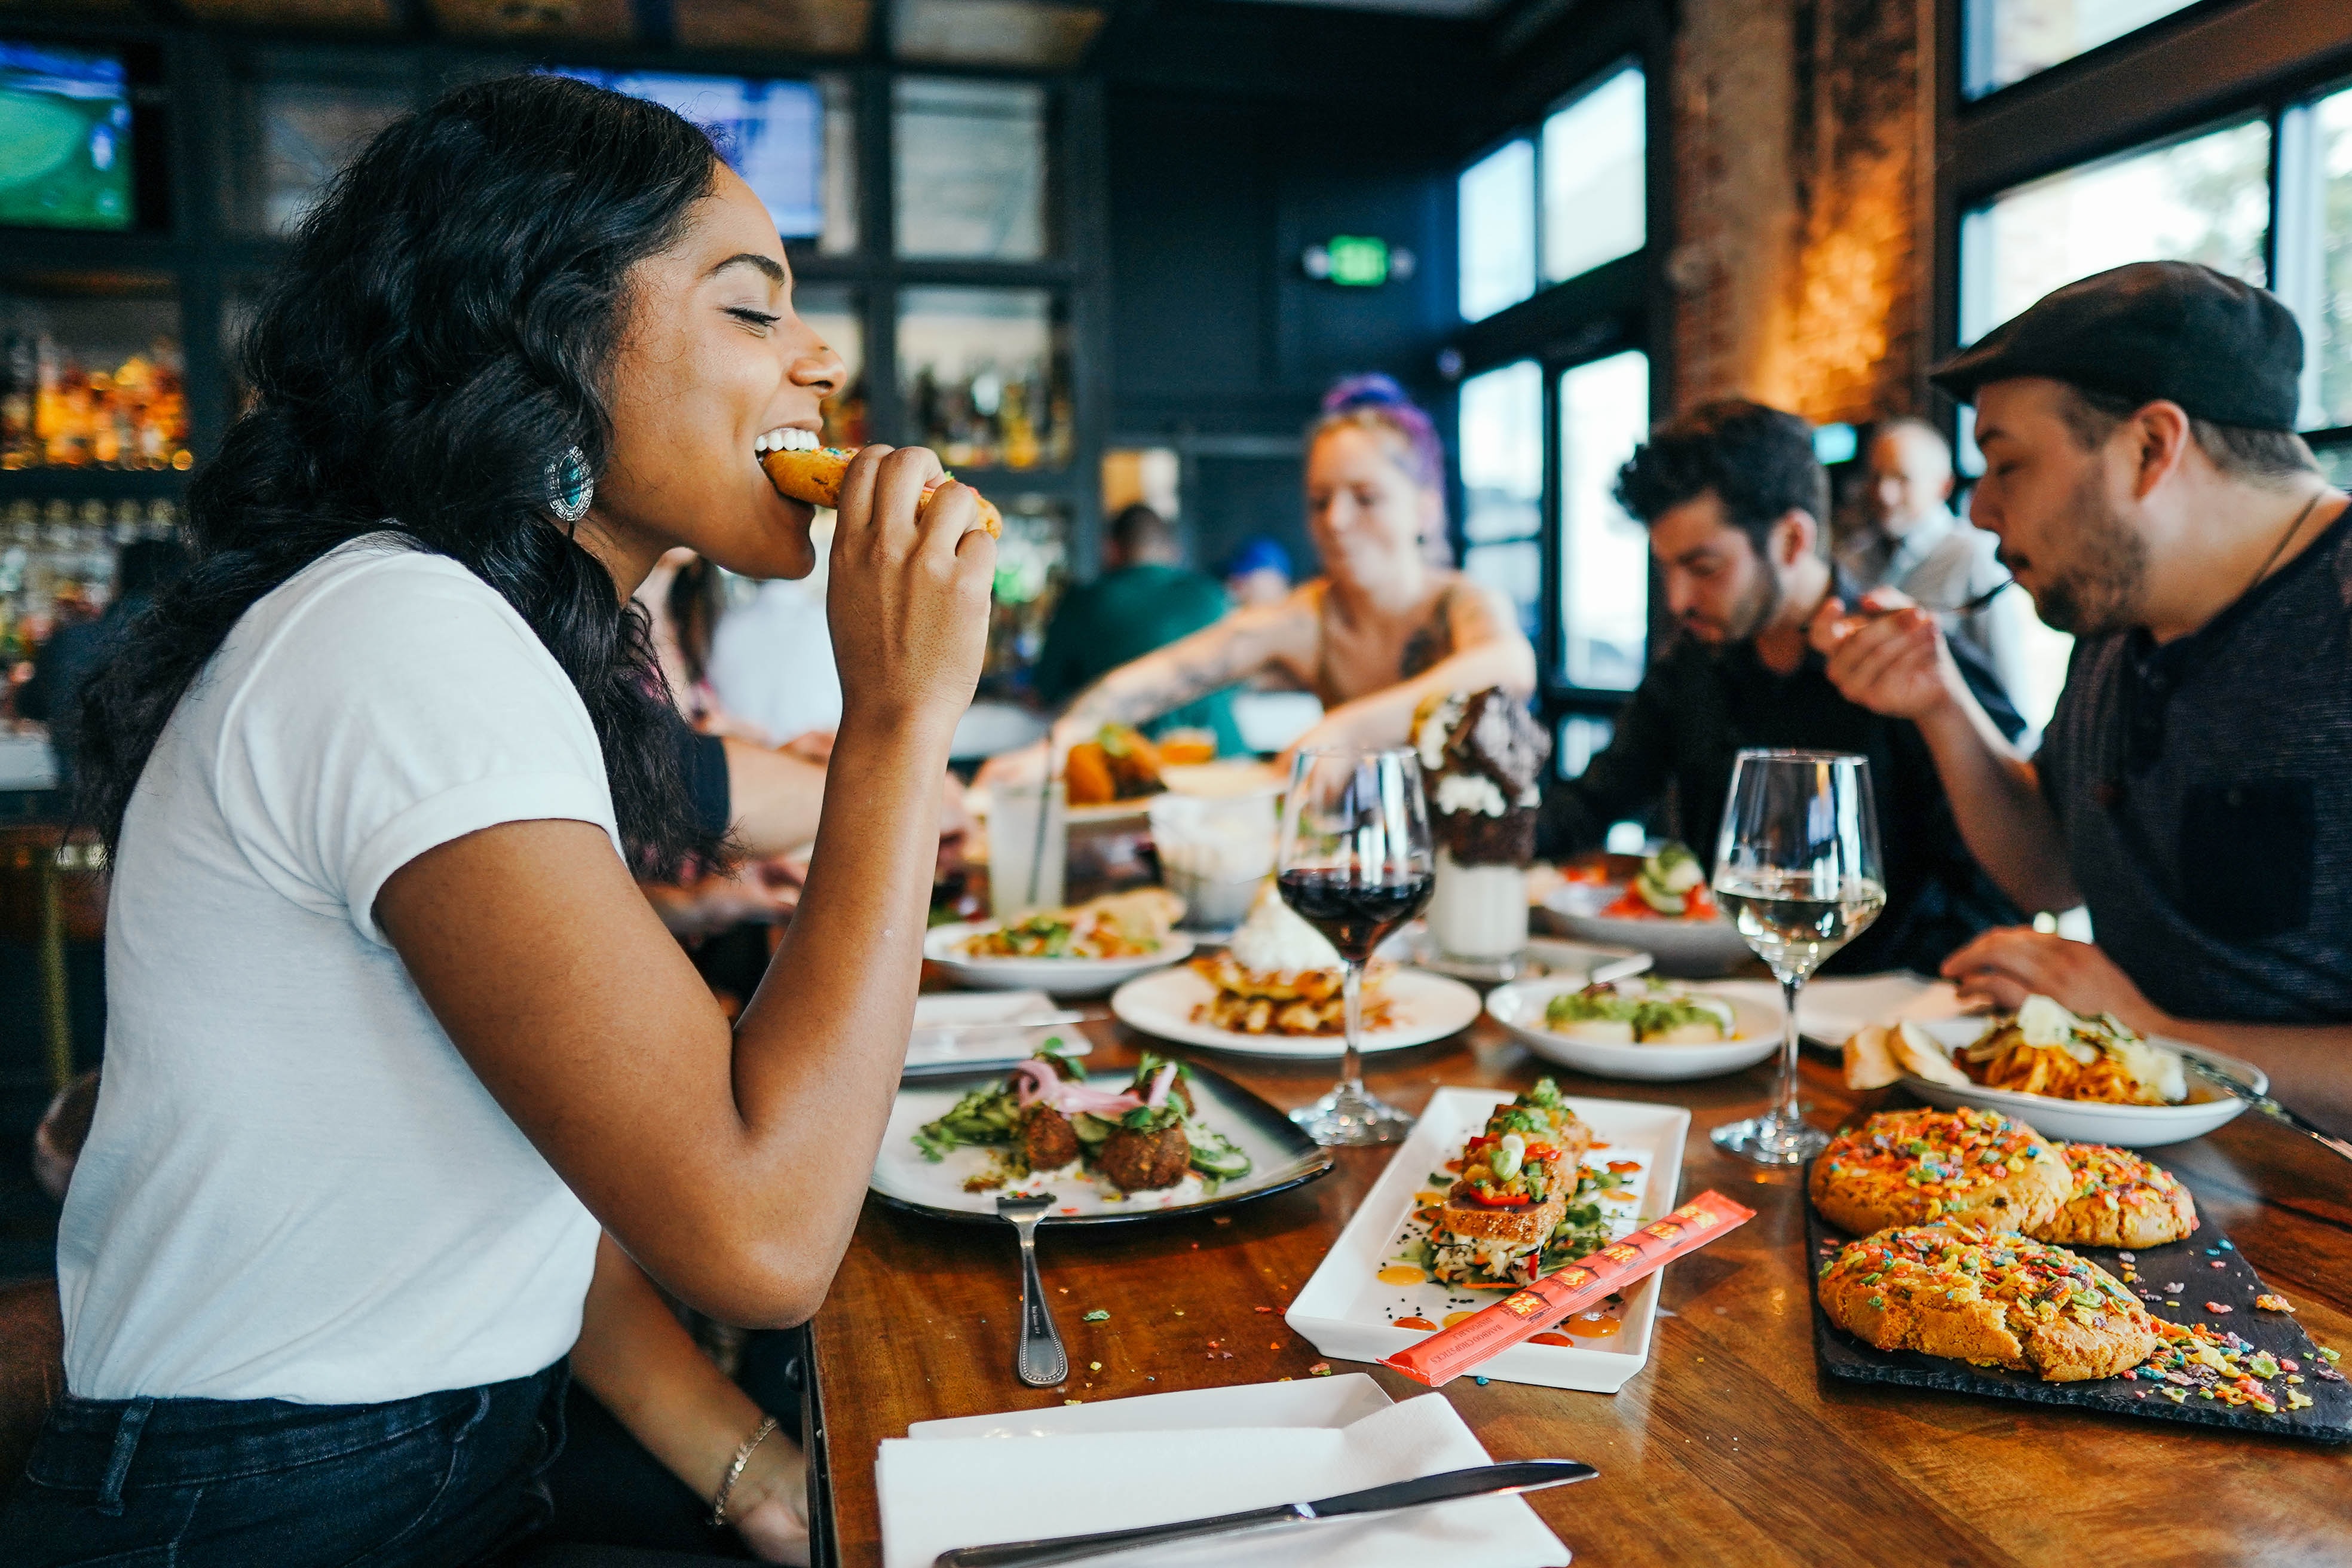 A woman takes a bite of food at a restaurant.